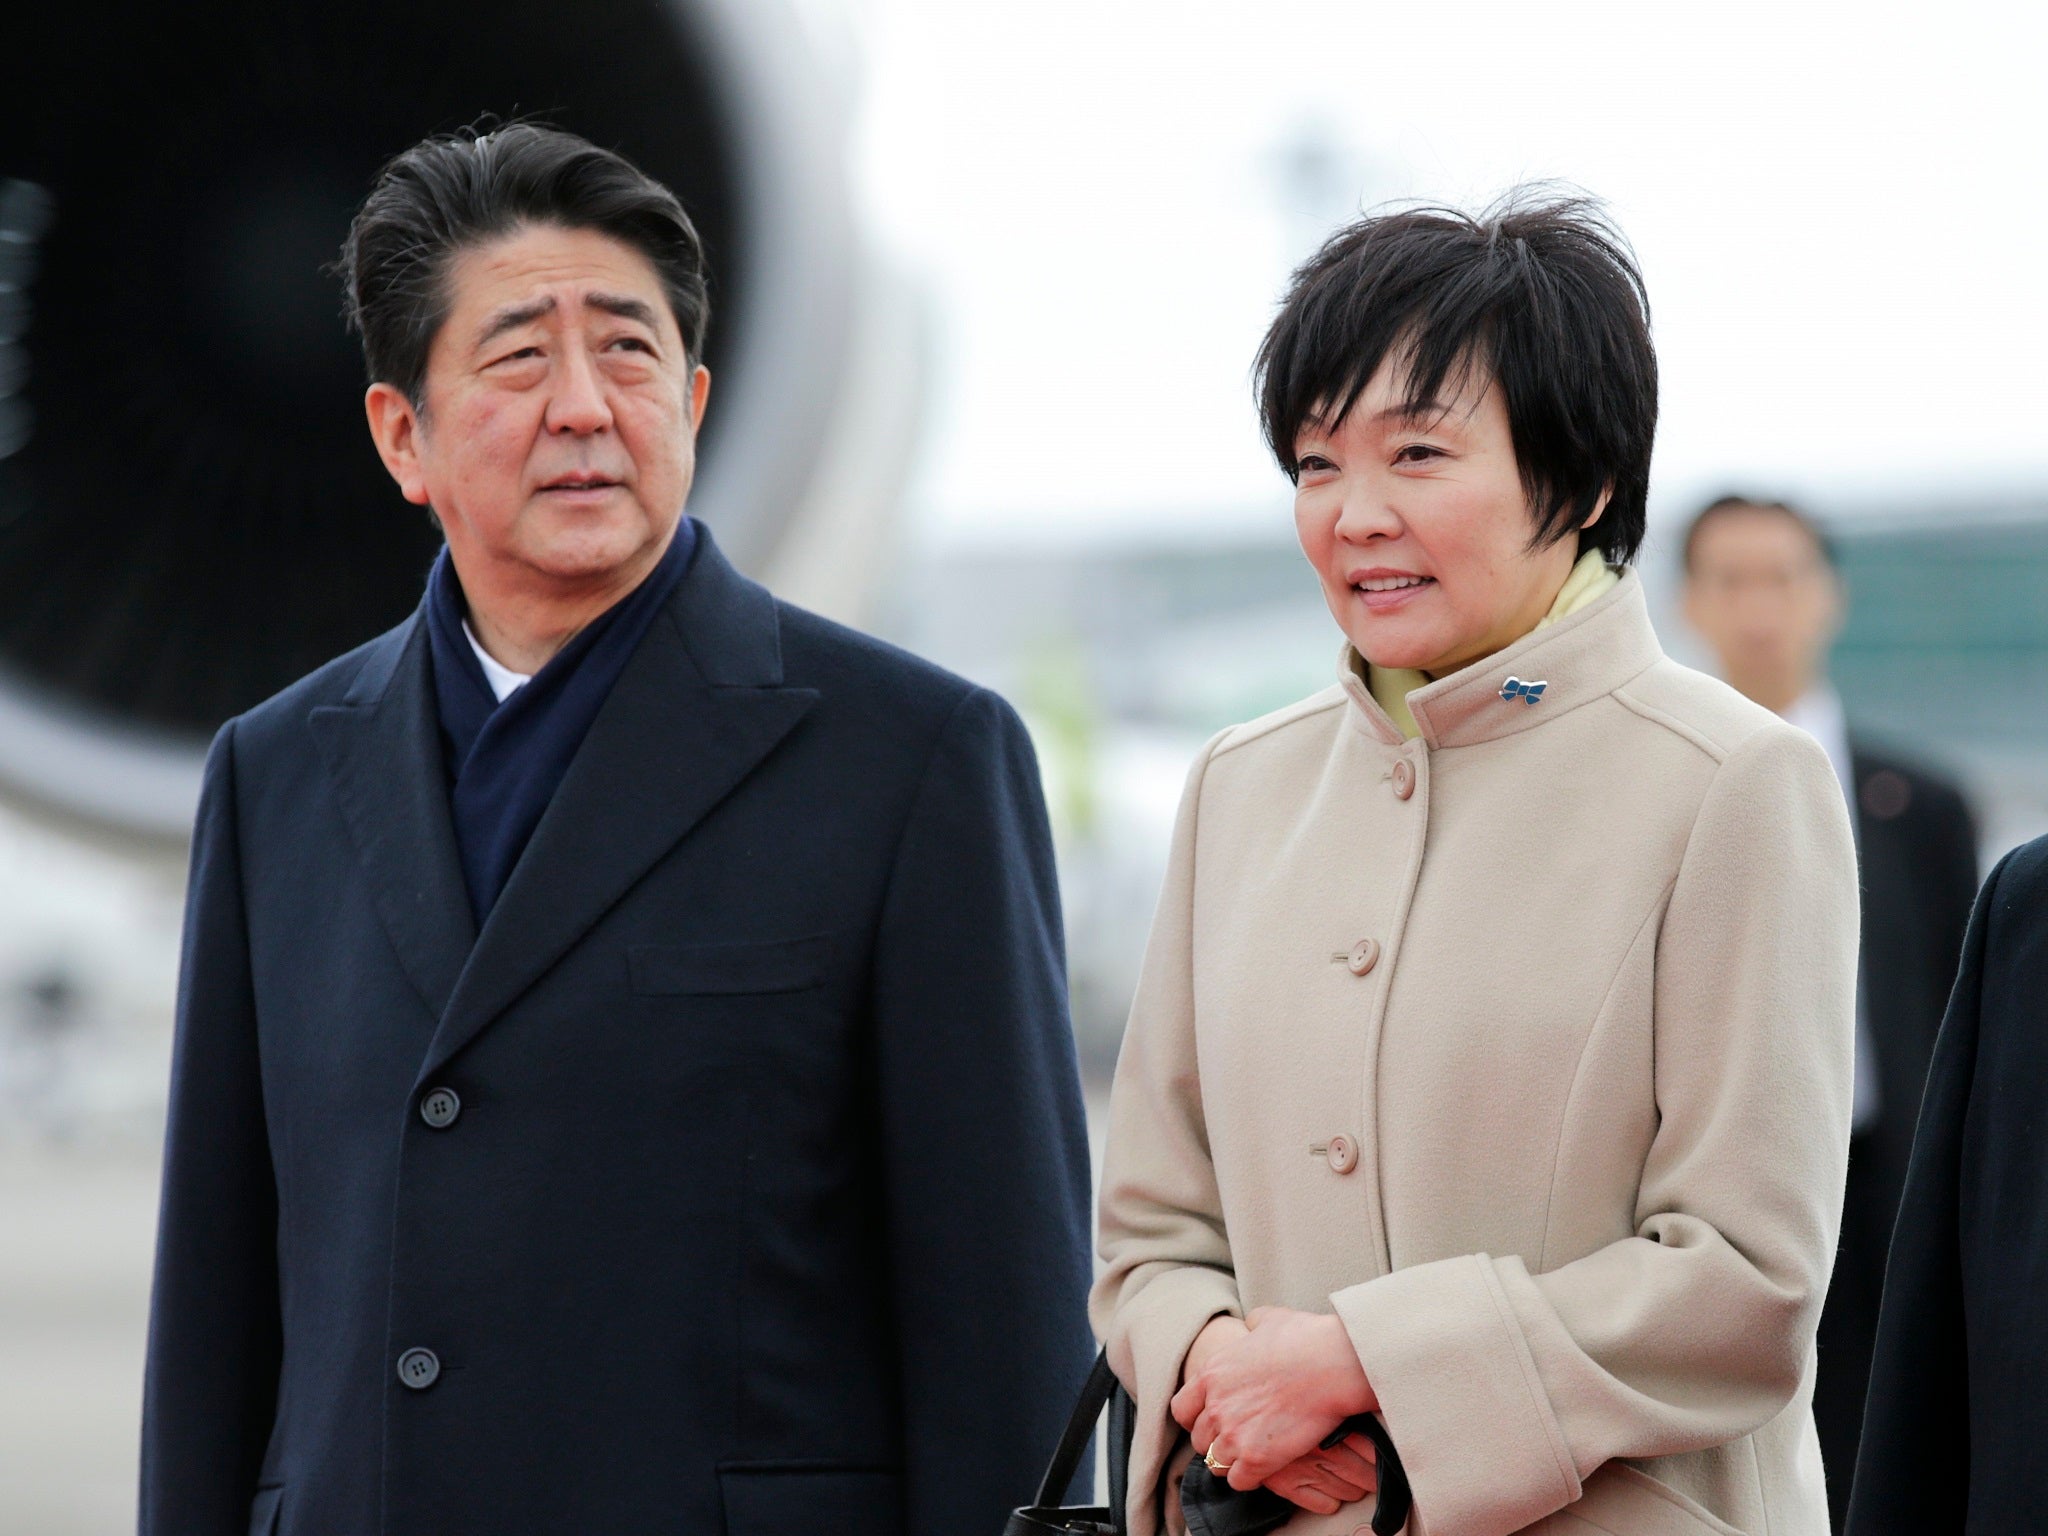 Japanese PM Shinzo Abe and his wife have been accused of giving a nationalist school a one million yen donation